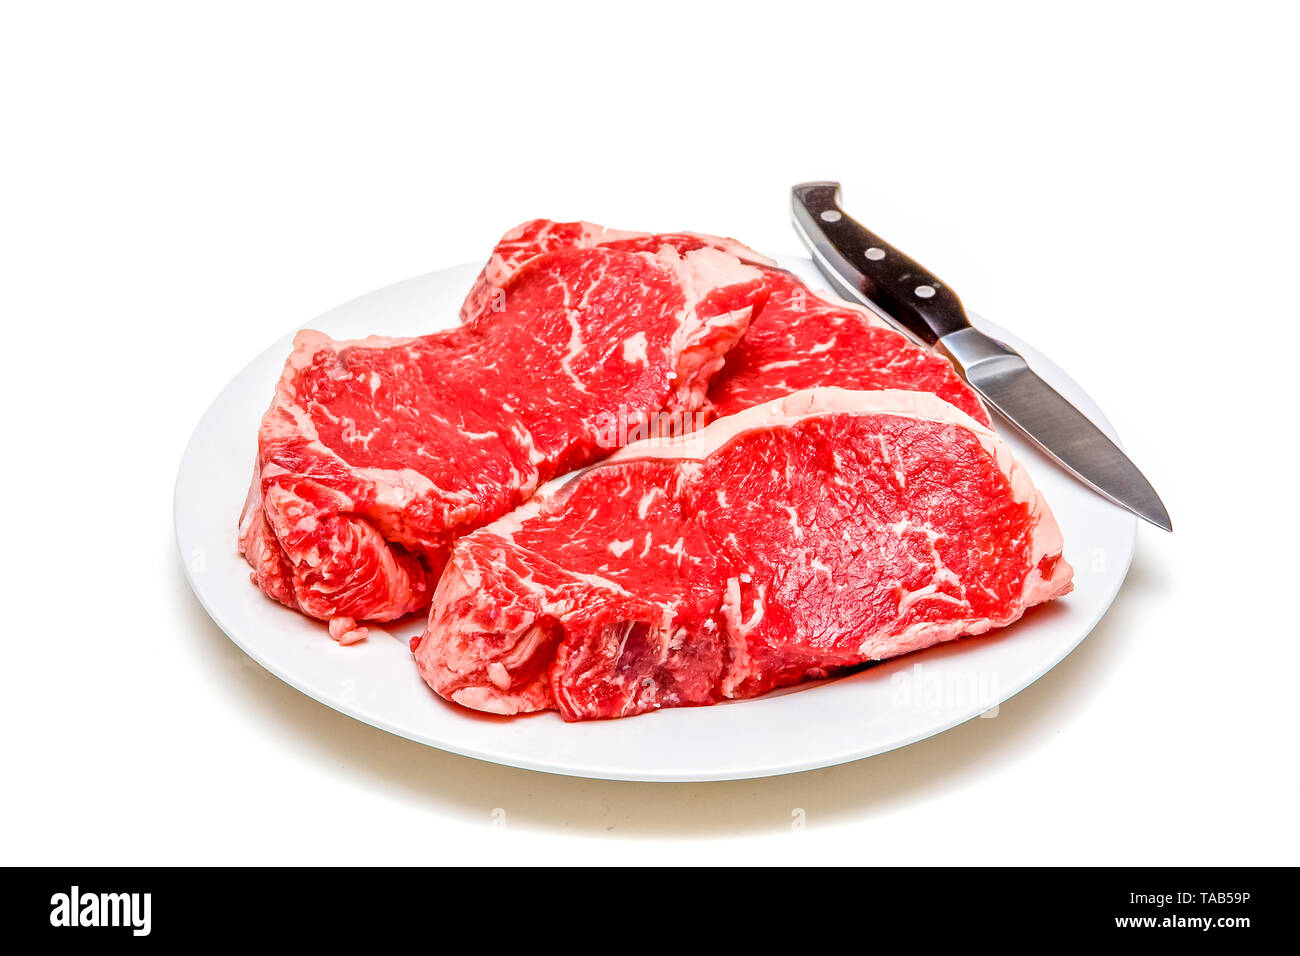 ATLANTA, GEORGIA - May 23, 2019:  The U.S. Department of Agriculture has issued a recall for more than 62,000 pounds of raw beef due to E. coli concer Stock Photo